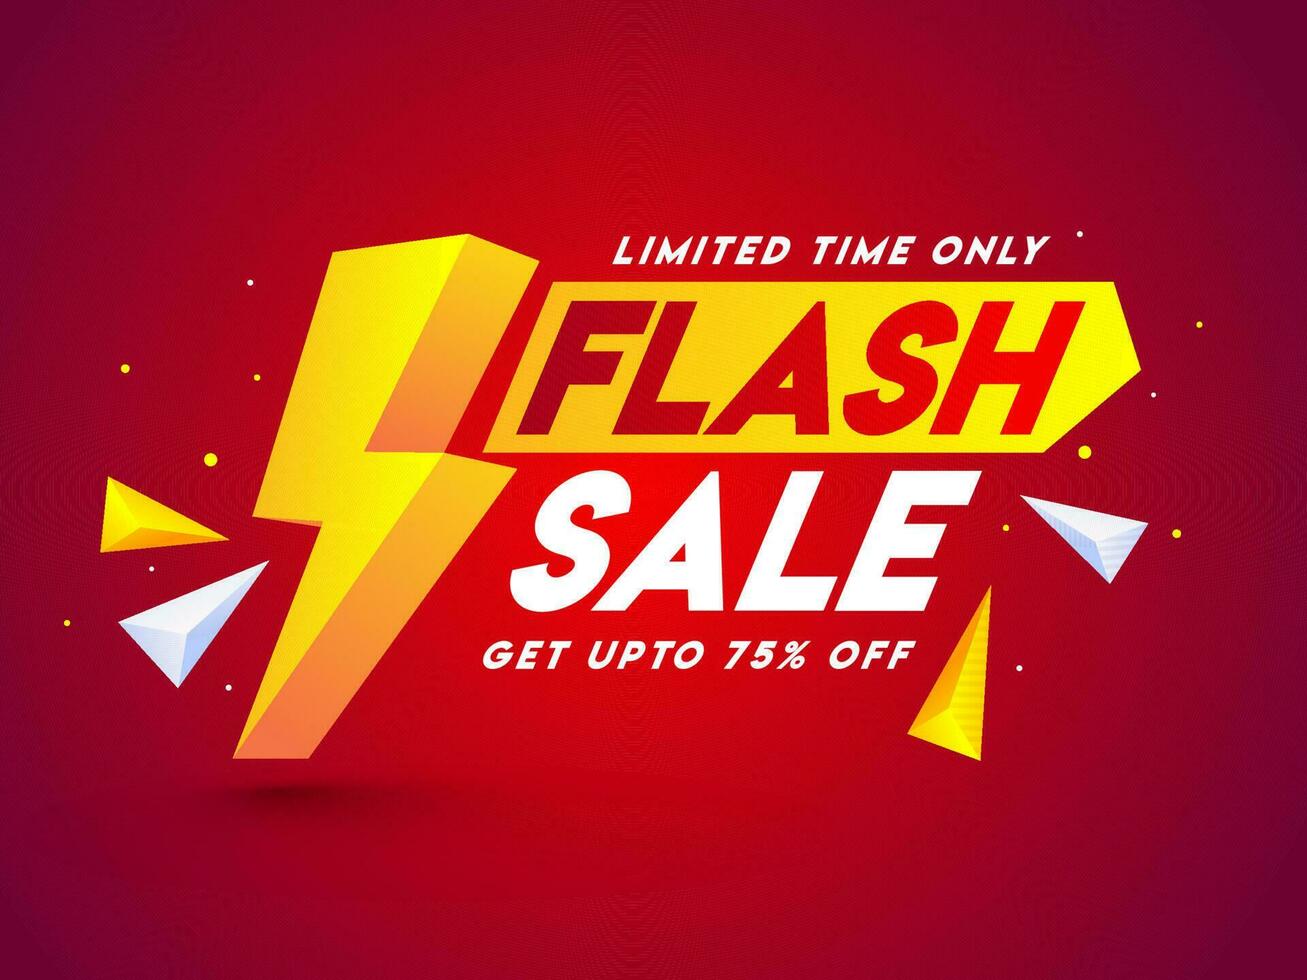 Advertising banner or poster design with 3d lighting bolt and discount offer on red background for Flash Sale. vector